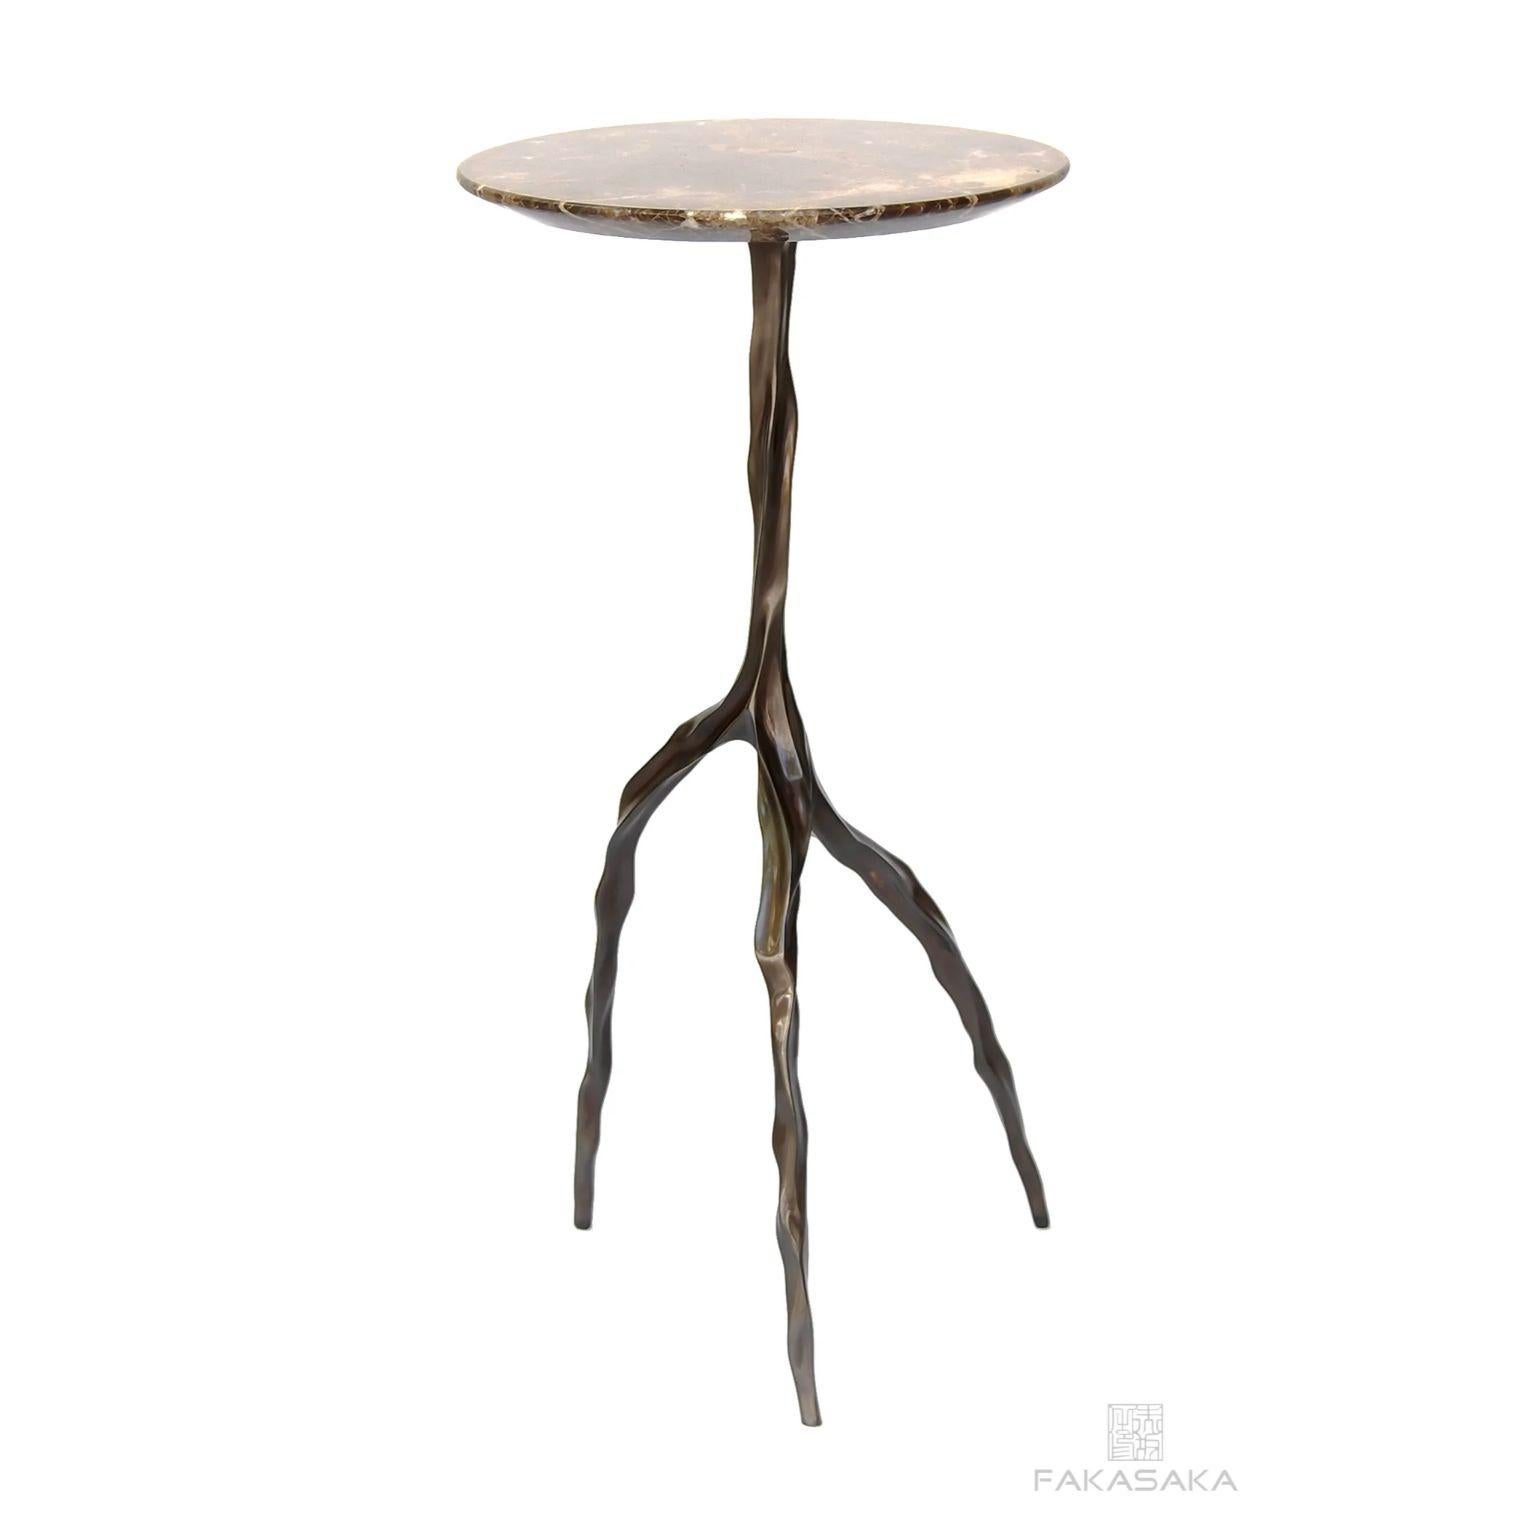 Contemporary Nina Drink Table with Marrom Imperial Marble Top by Fakasaka Design For Sale